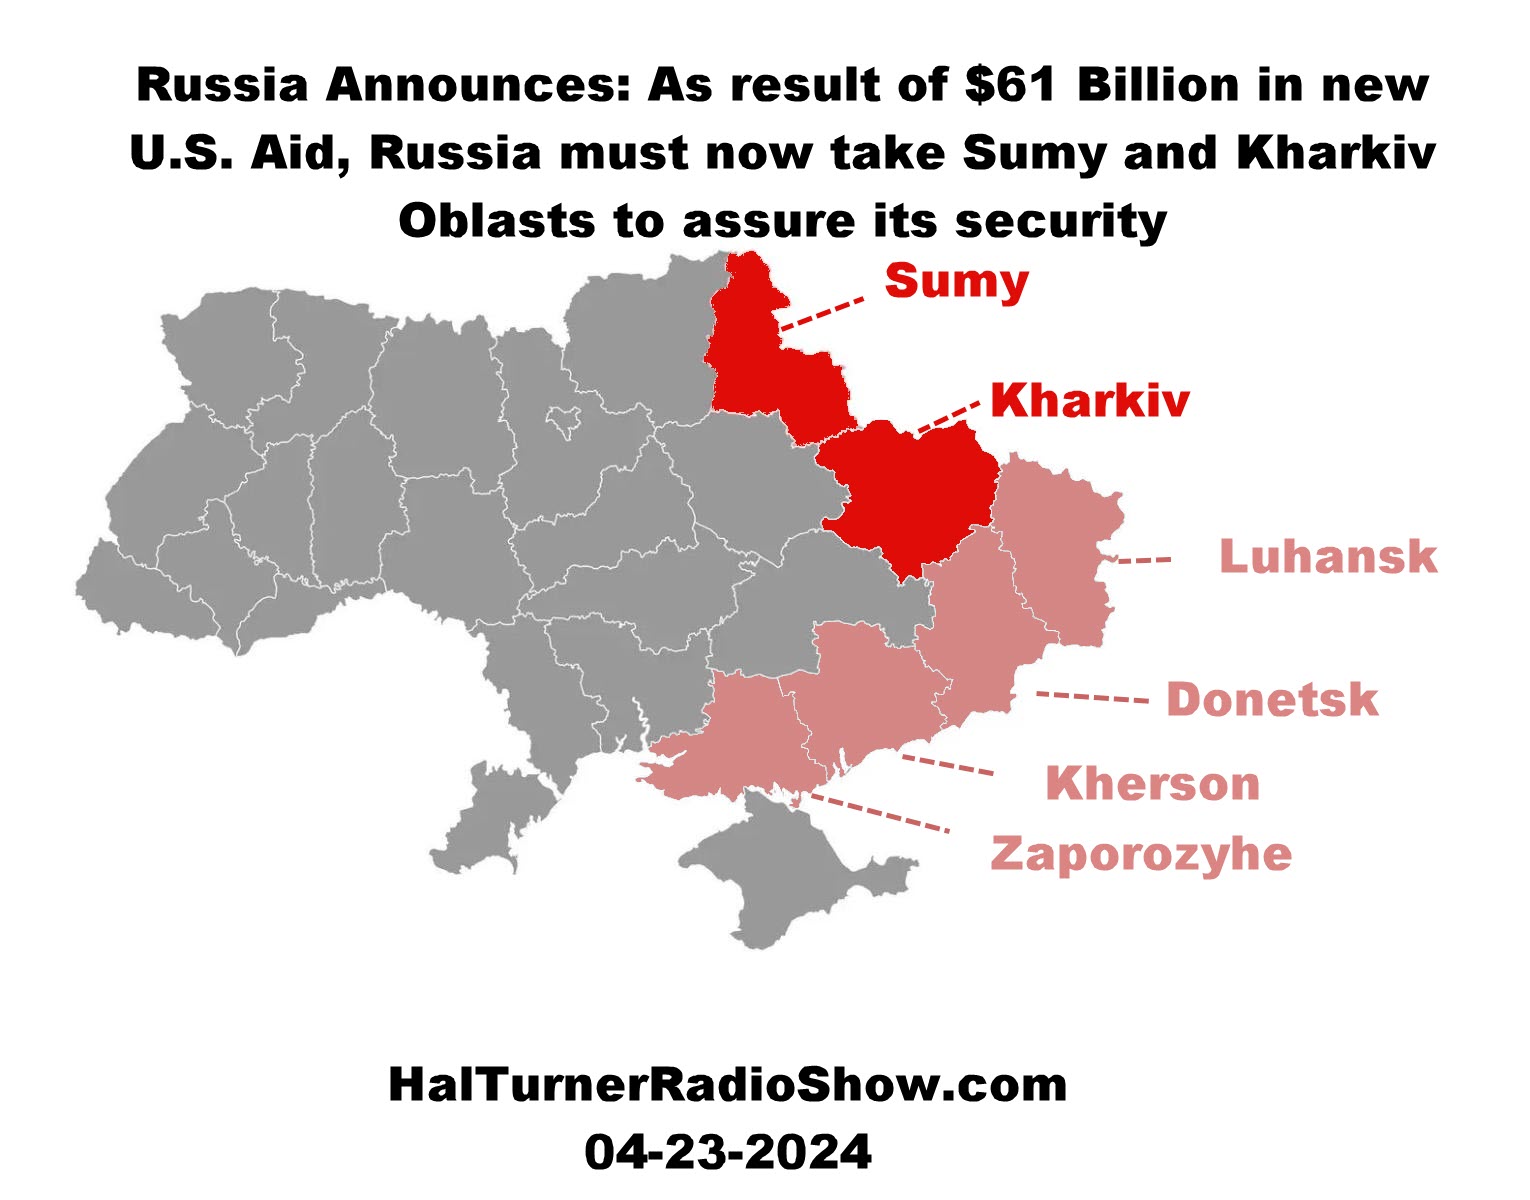 Sumy and Kharkov Oblasts